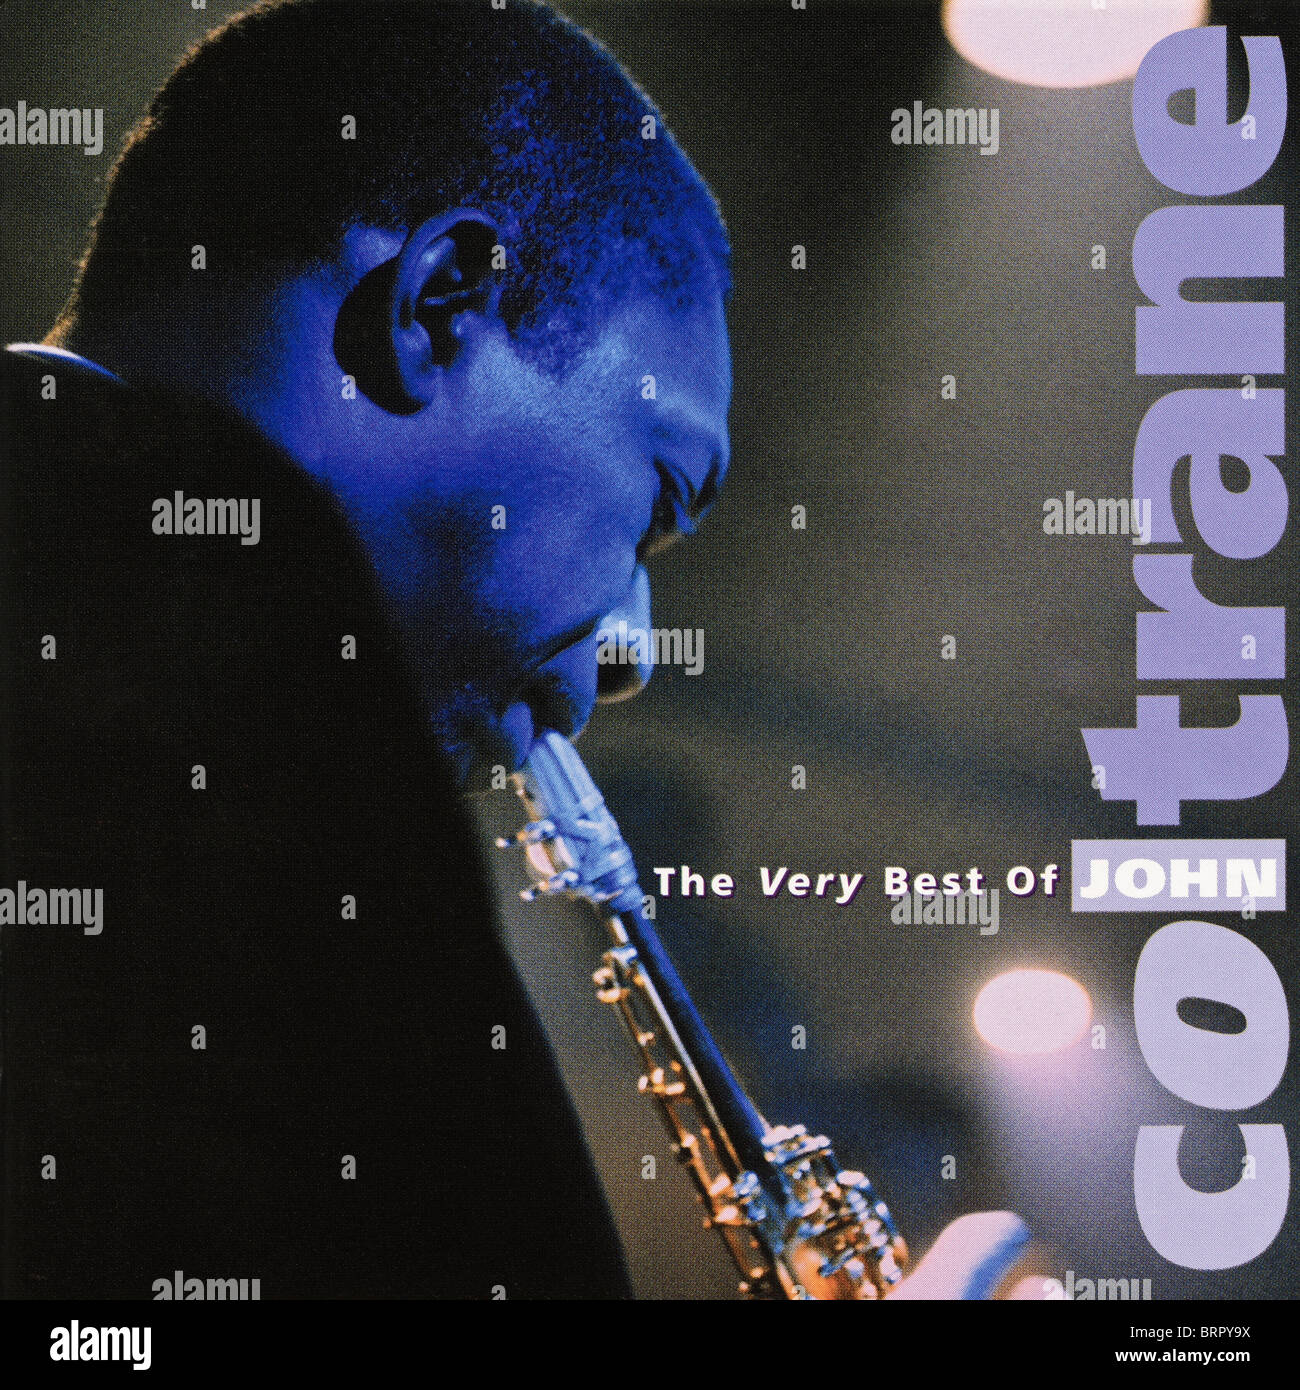 Album cover of The Very Best of John Coltrane released by Atlantic Records in 2000 Stock Photo